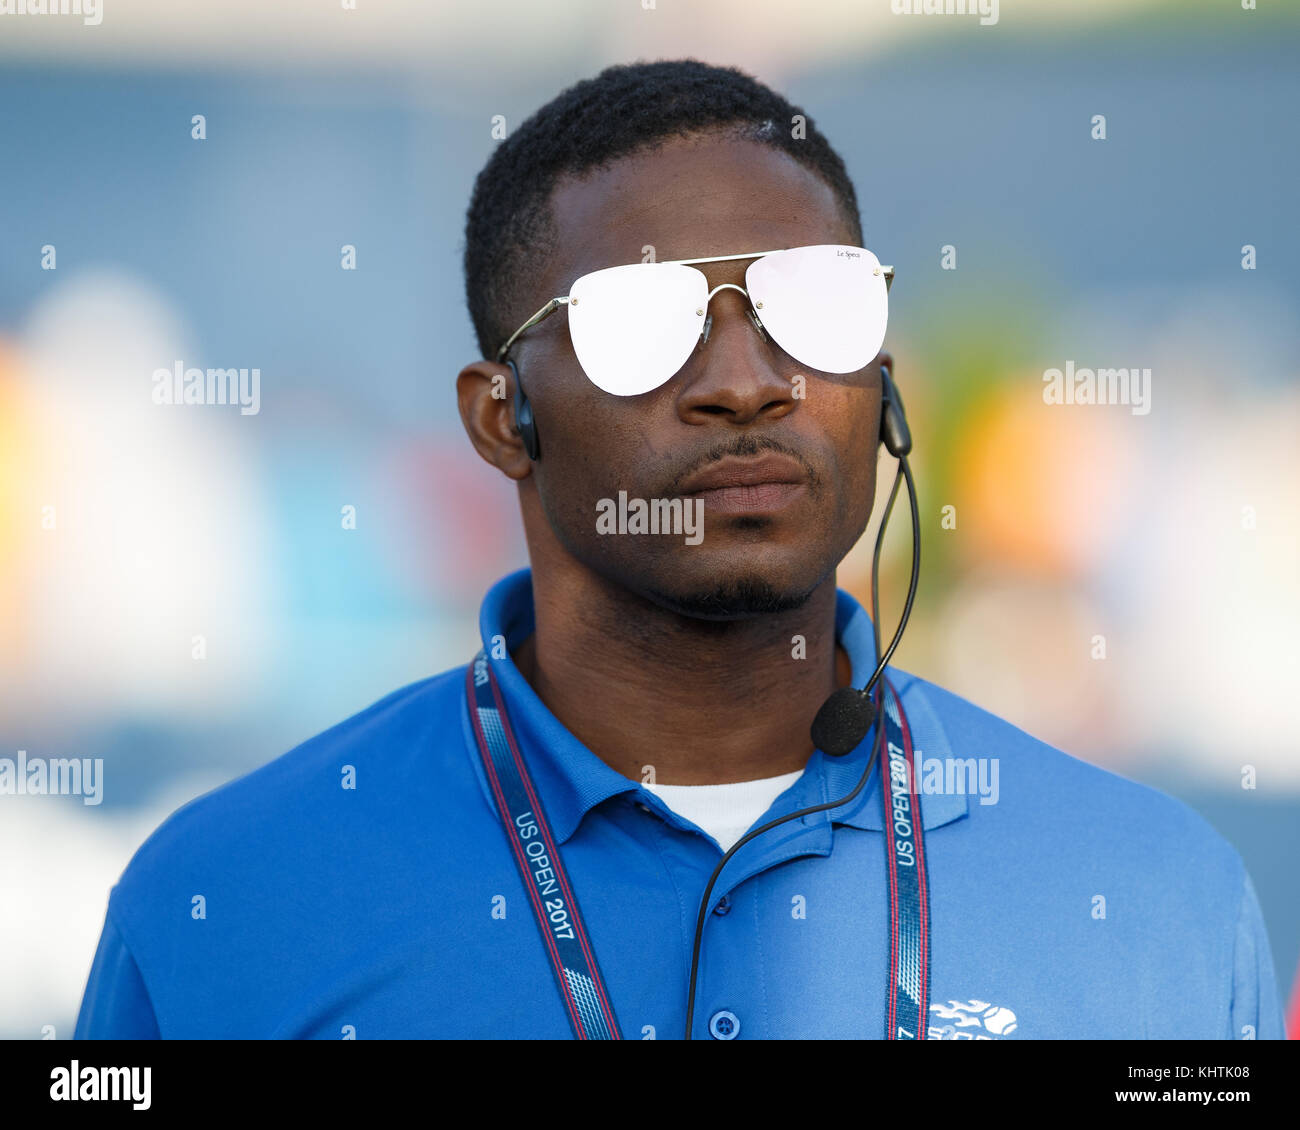 Portrait of male line judge  wearing sunglasses at US Open 2017 Tennis Championship, New York City, New York State, United States. Stock Photo